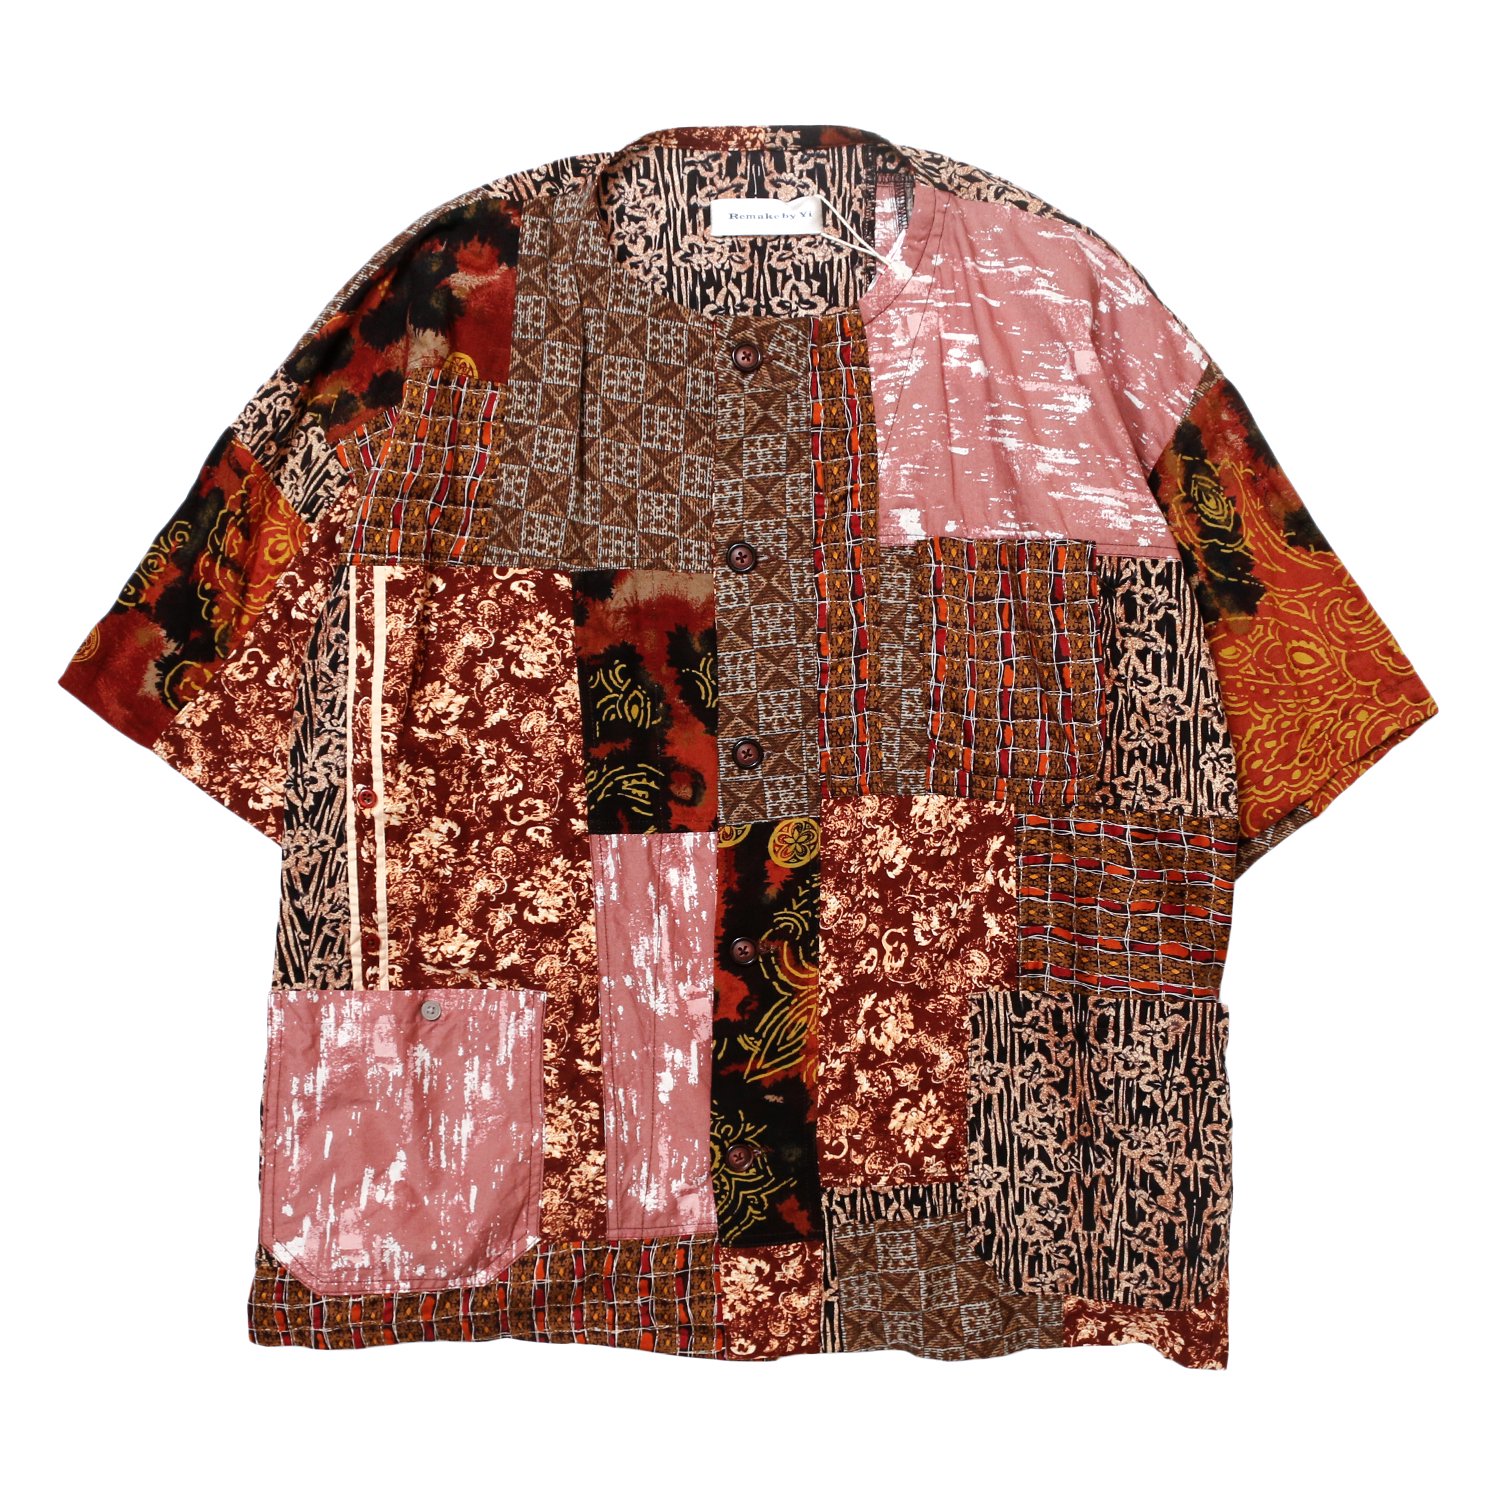 <img class='new_mark_img1' src='https://img.shop-pro.jp/img/new/icons8.gif' style='border:none;display:inline;margin:0px;padding:0px;width:auto;' />Remake by Yi / Shirt (Vintage shirt *6)